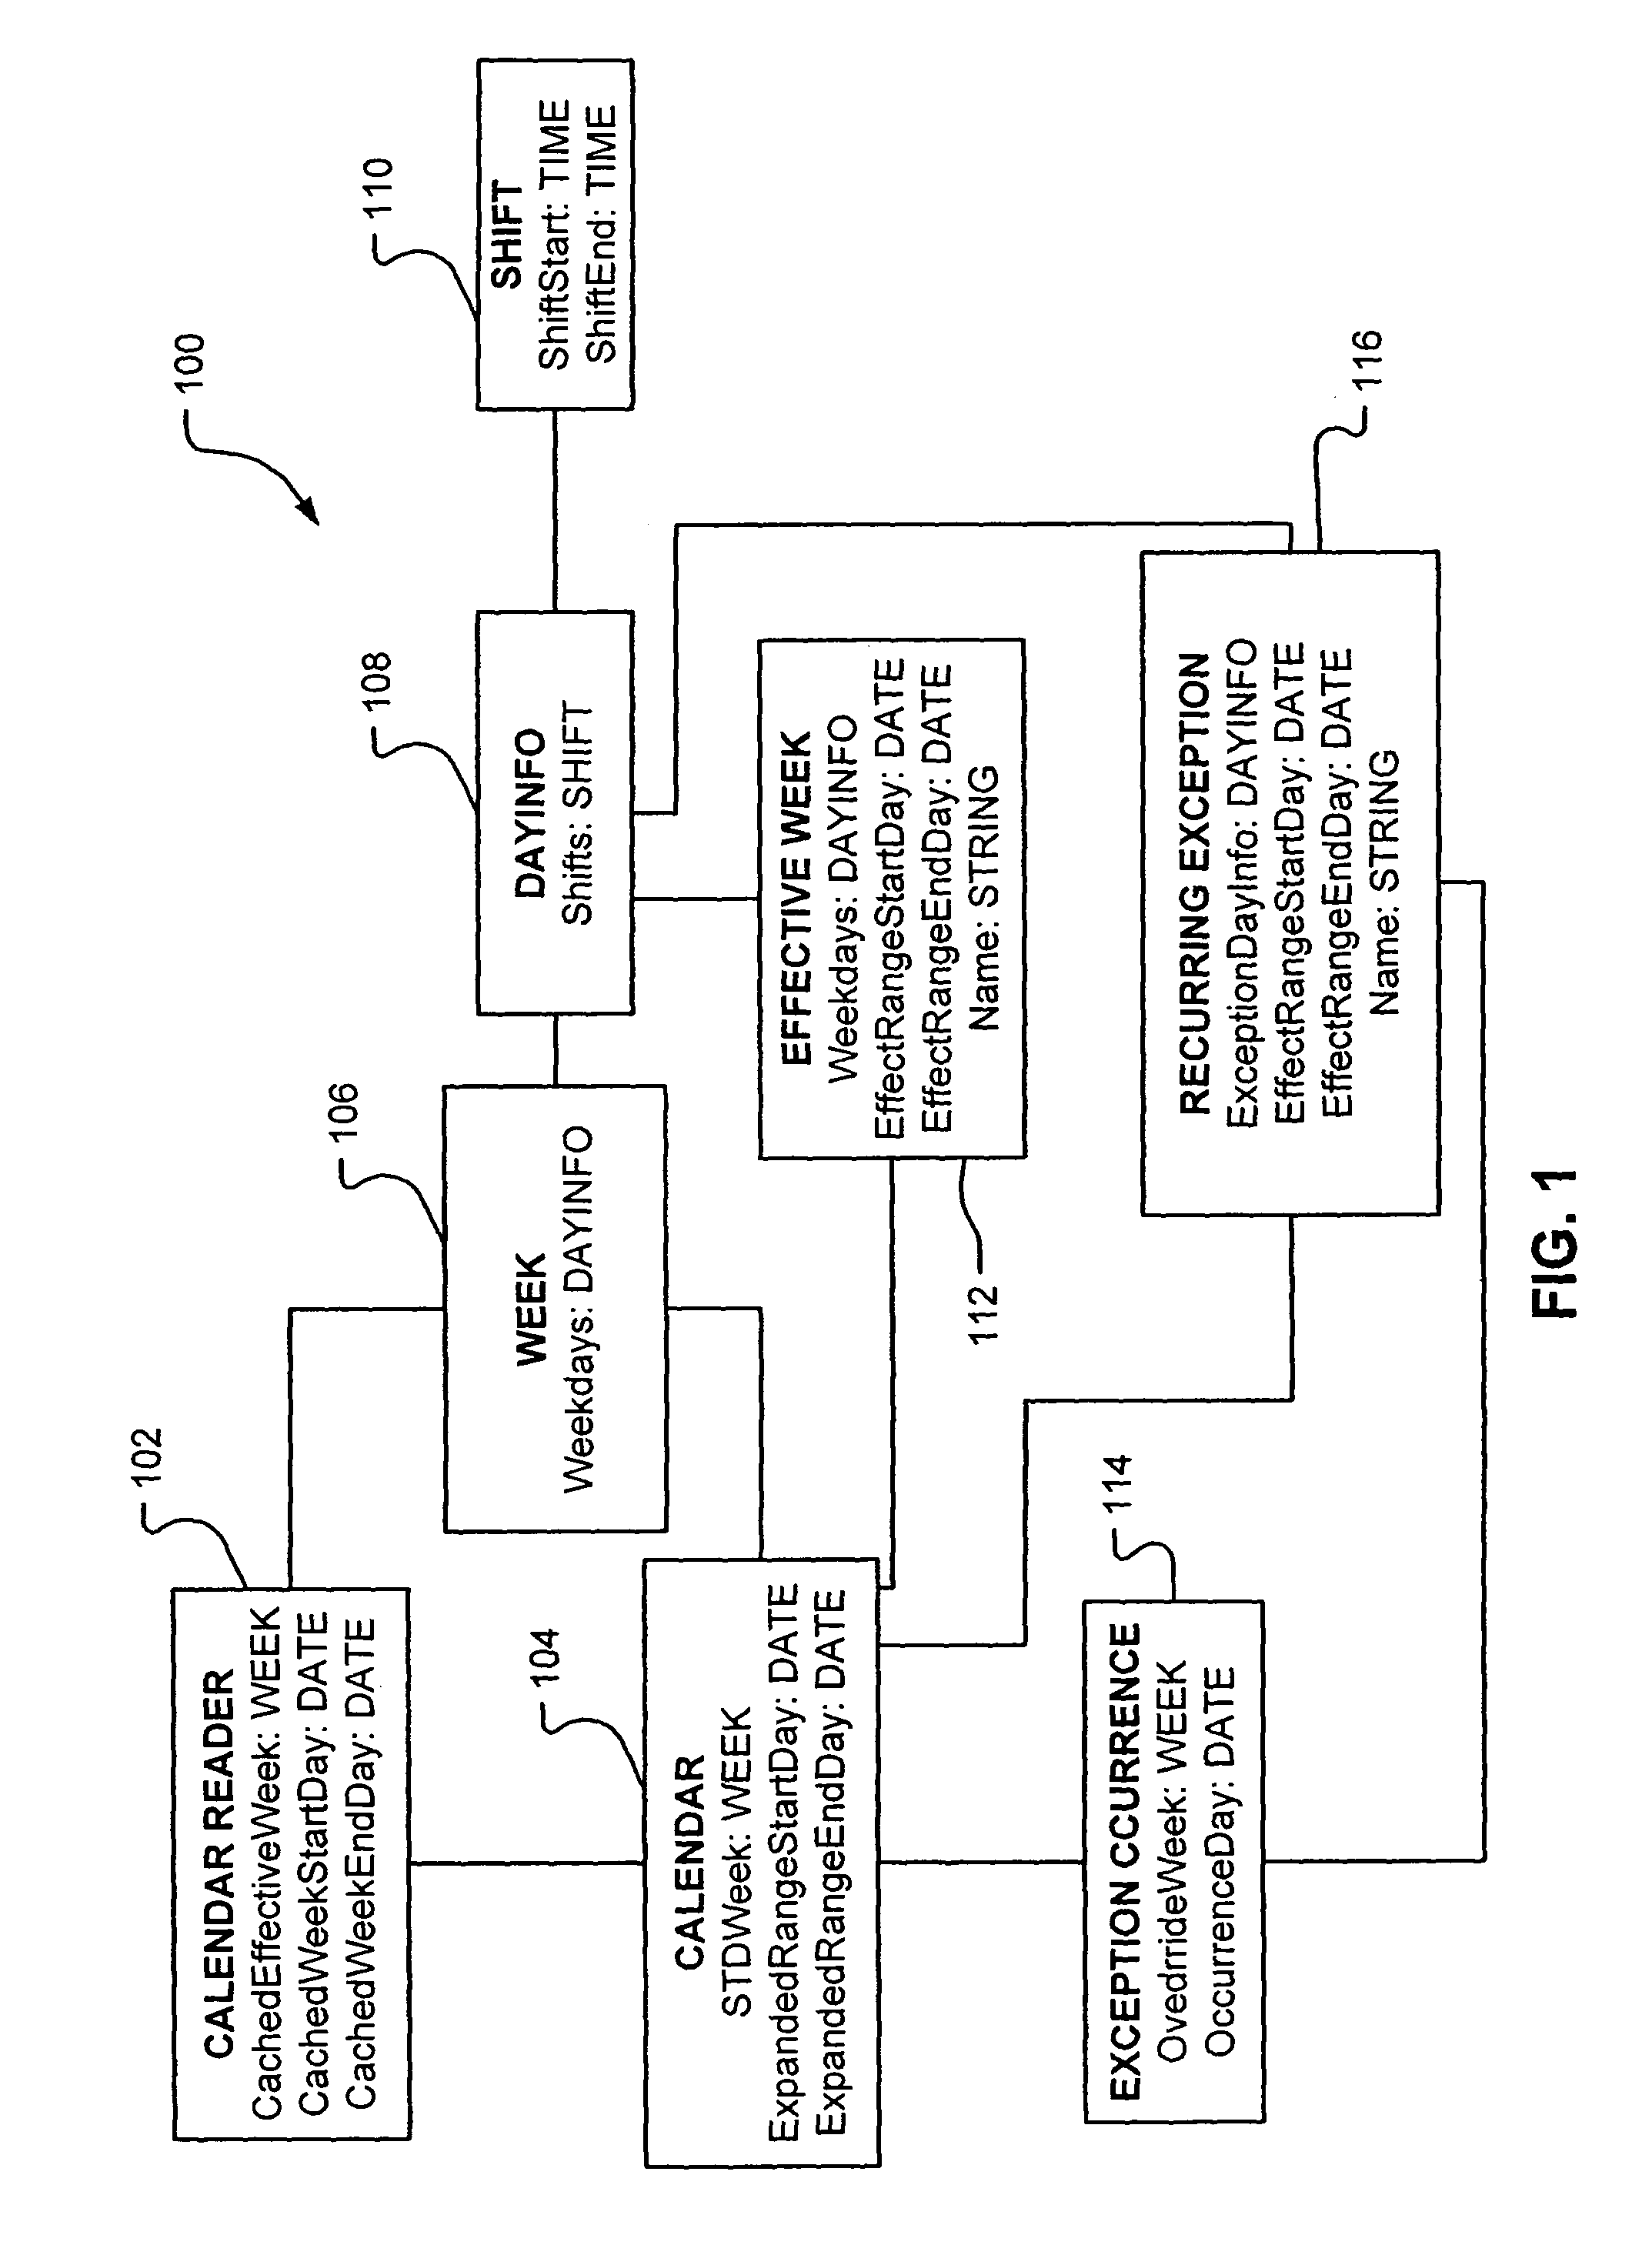 Method and system for work scheduling on calendars to establish day state information